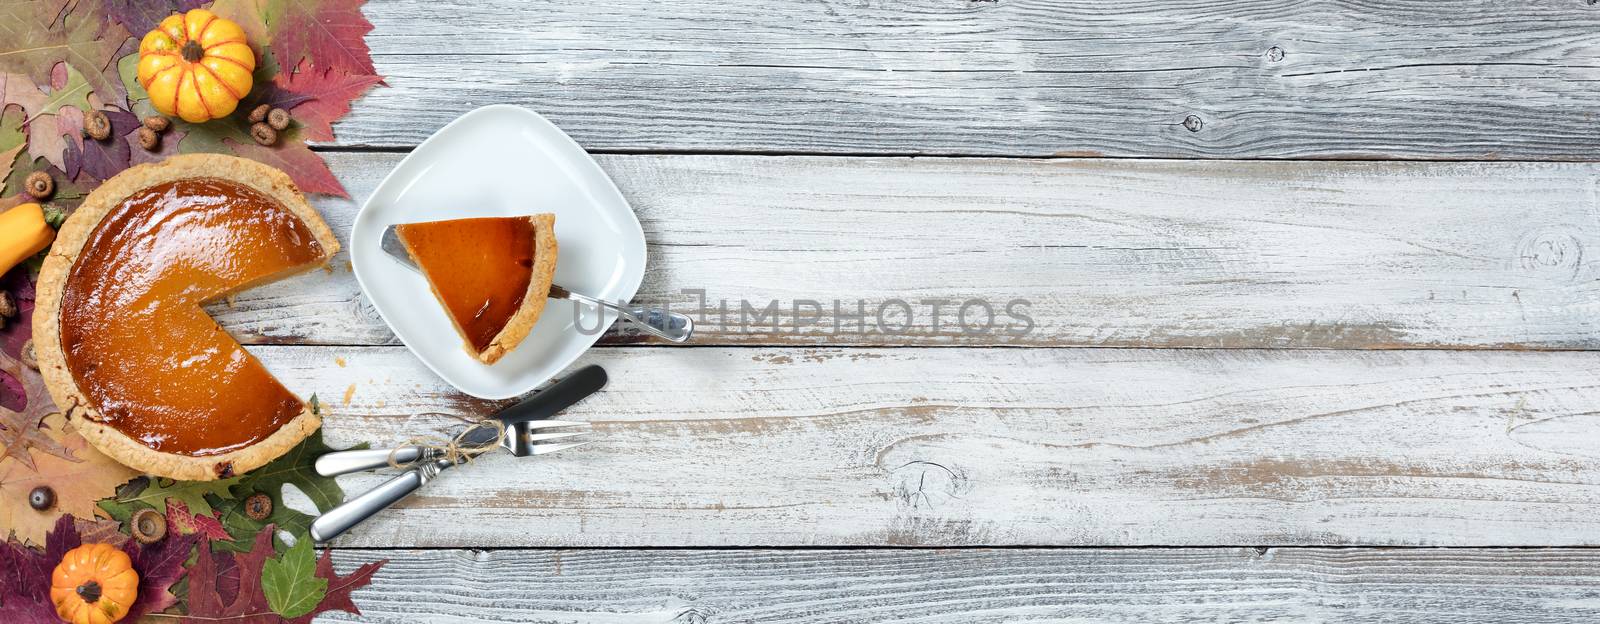 Homemade pumpkin pie served for the Autumn holidays by tab1962